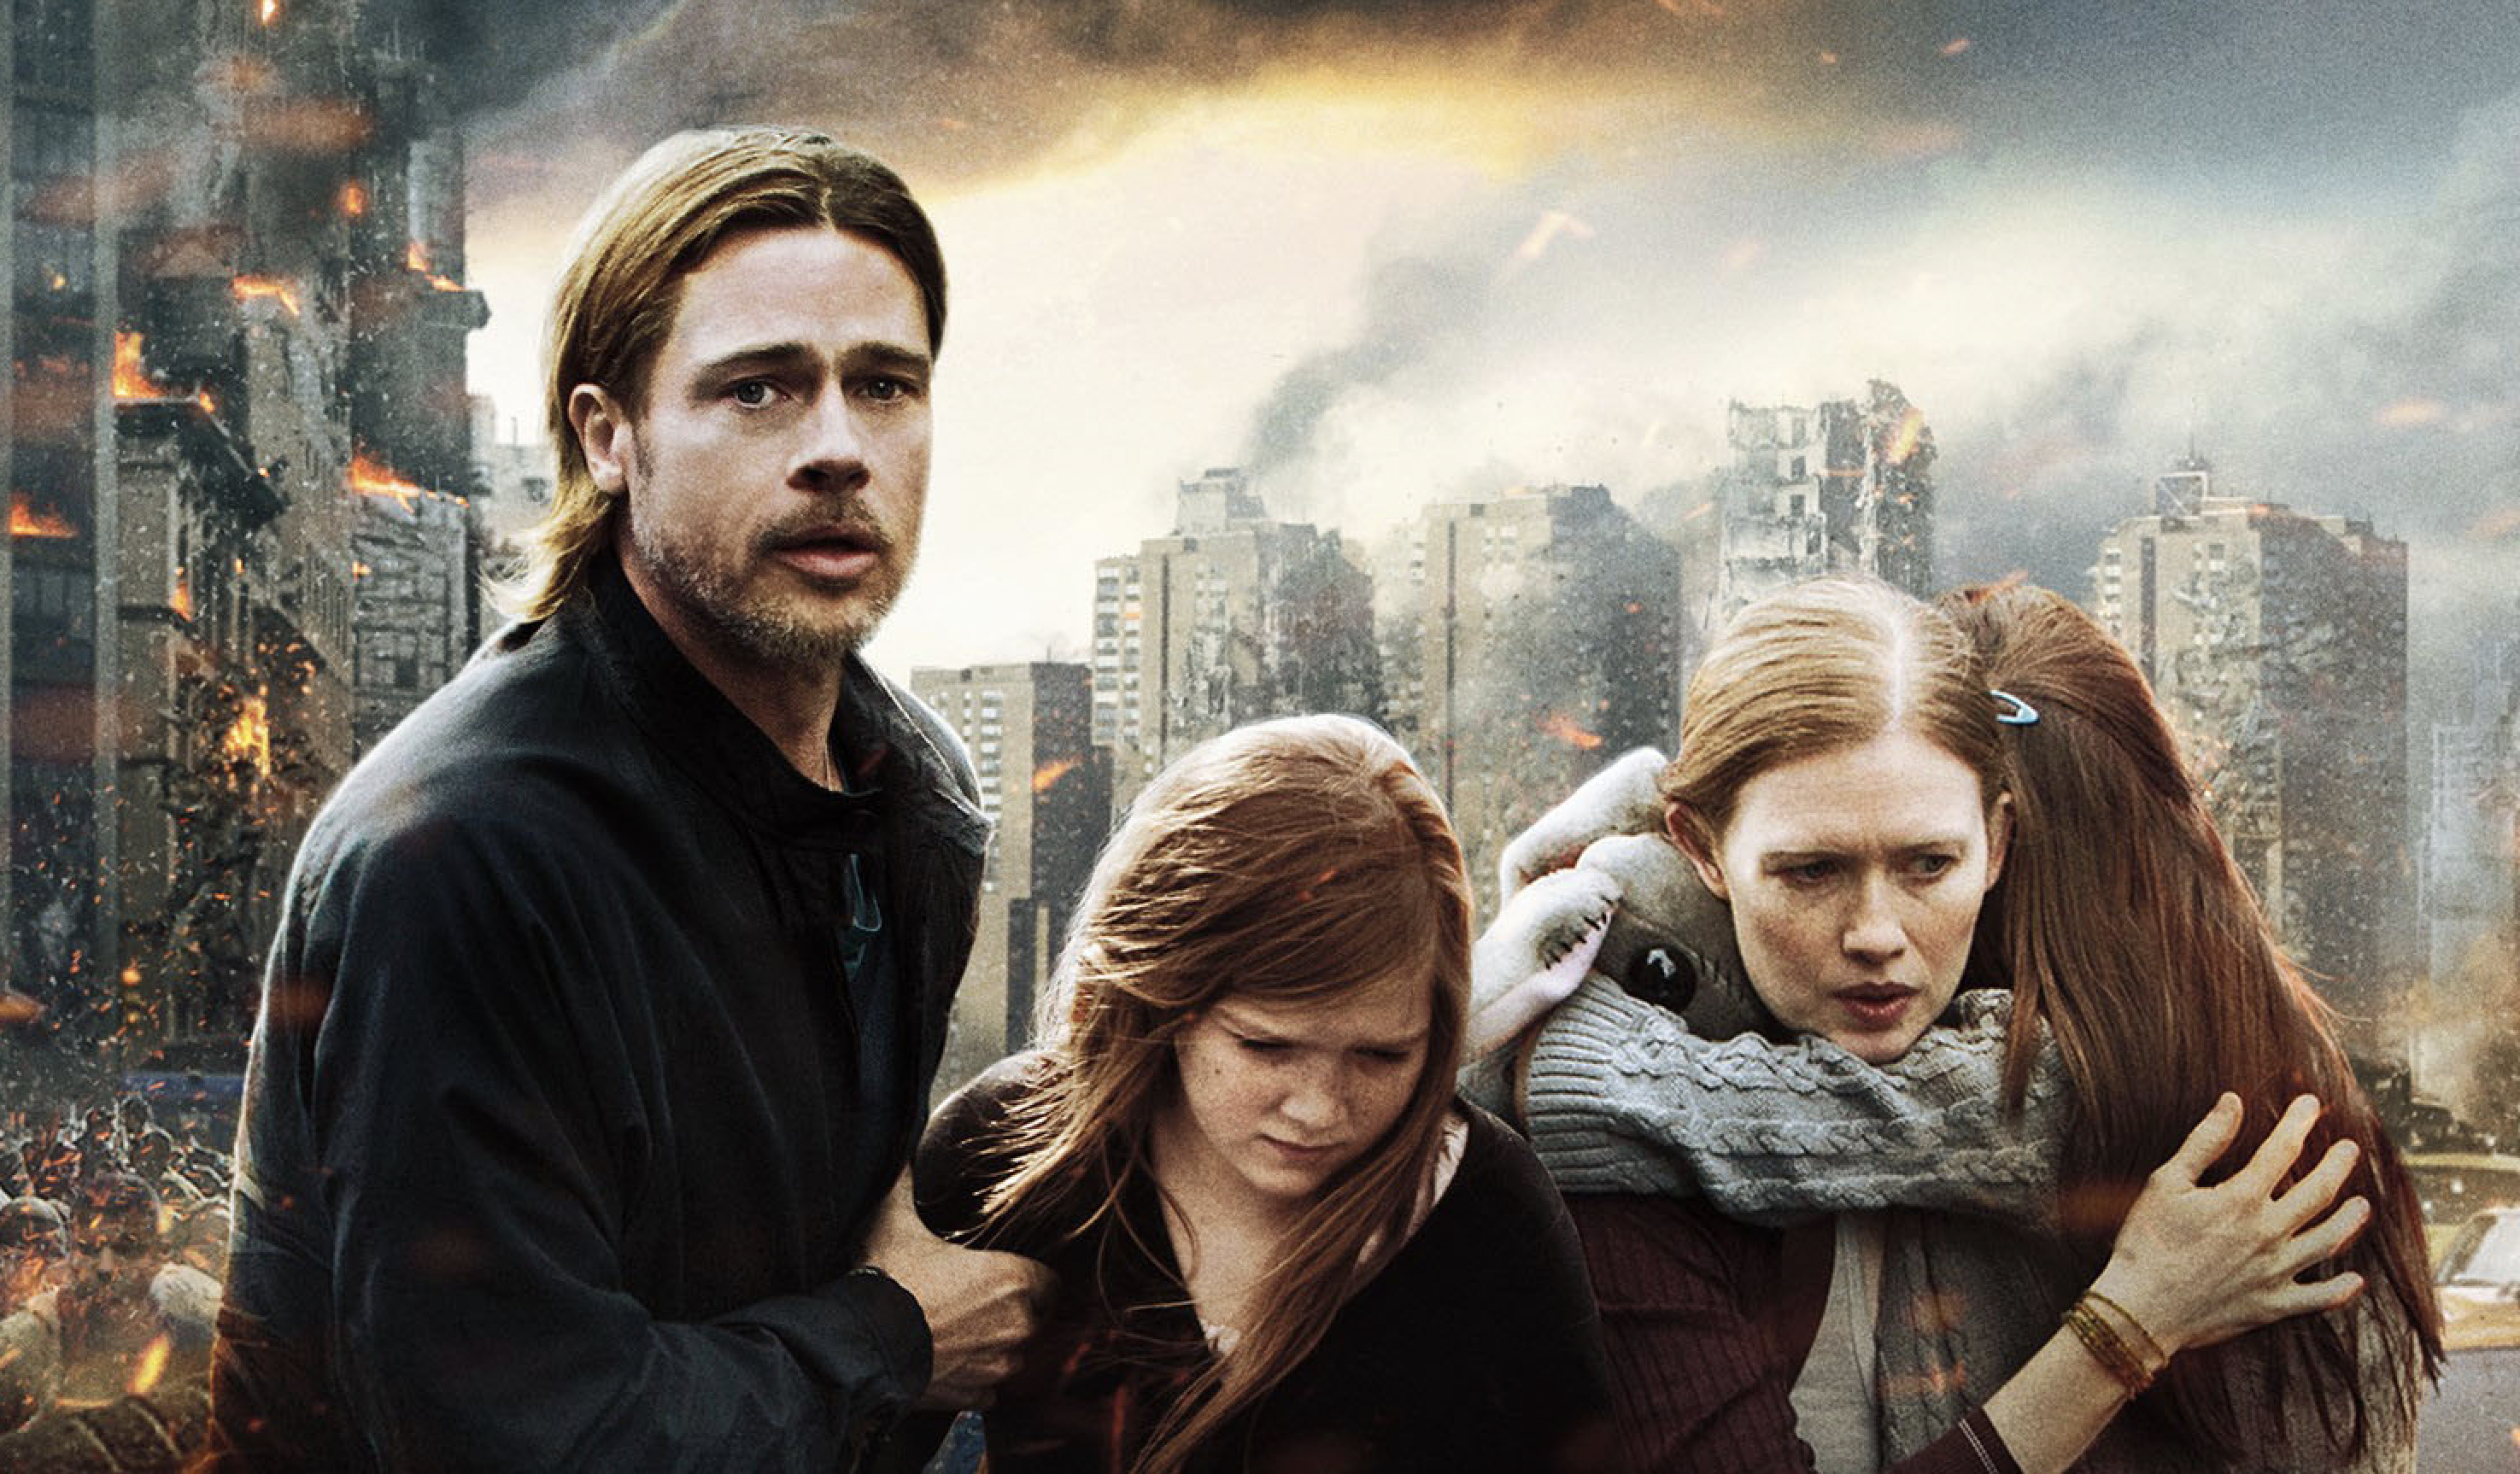 World War Z: A Gripping Tale of Survival and Chaos